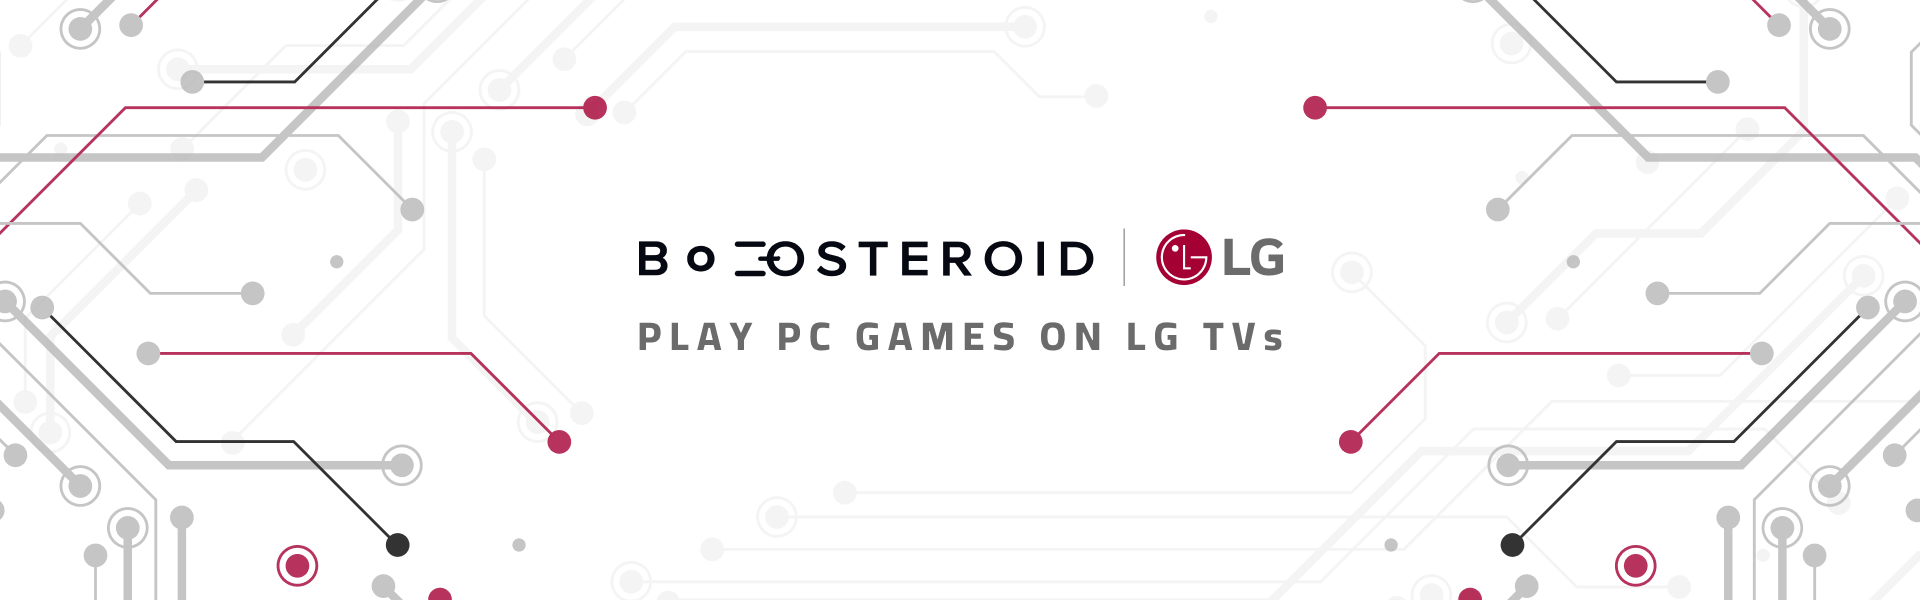 Boosteroid is live on LG TVs - Boosteroid Blog